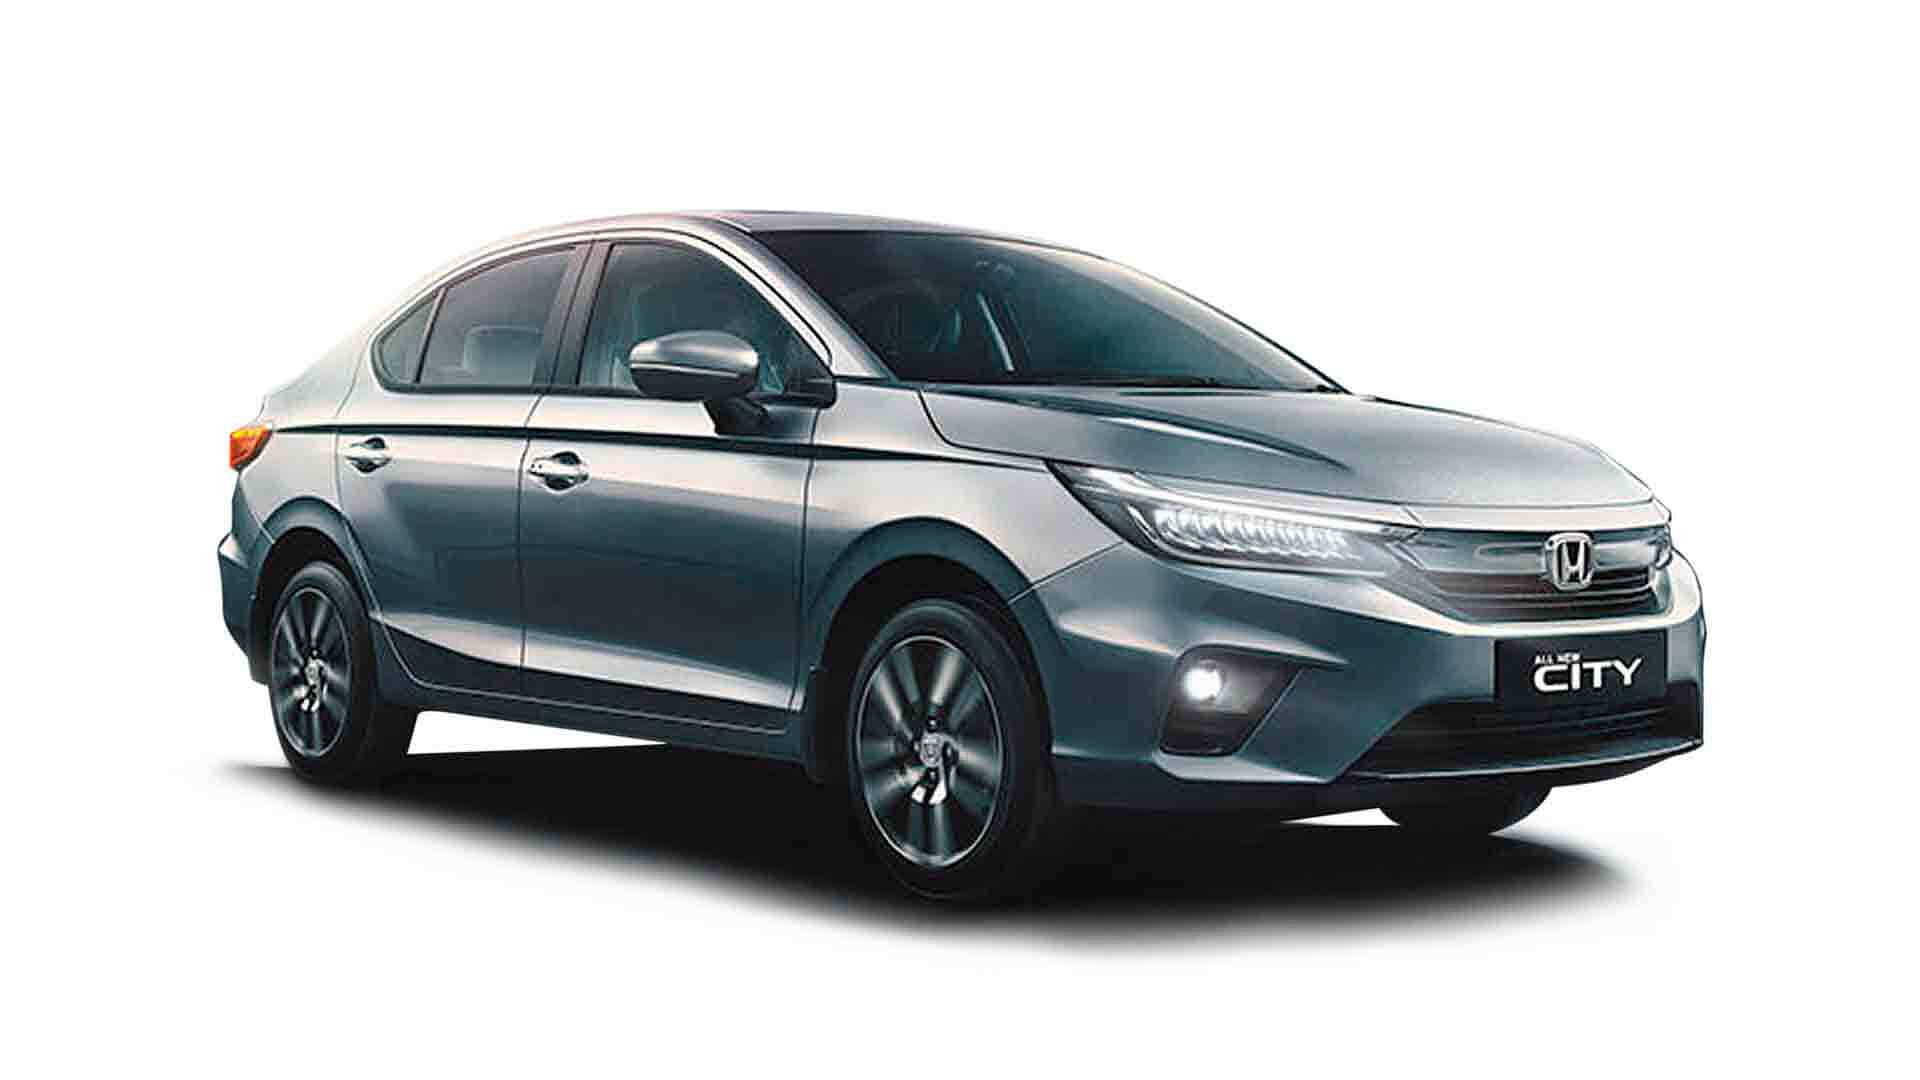 New Honda City 2020 Price, Images, Mileage & Colours - CarWale